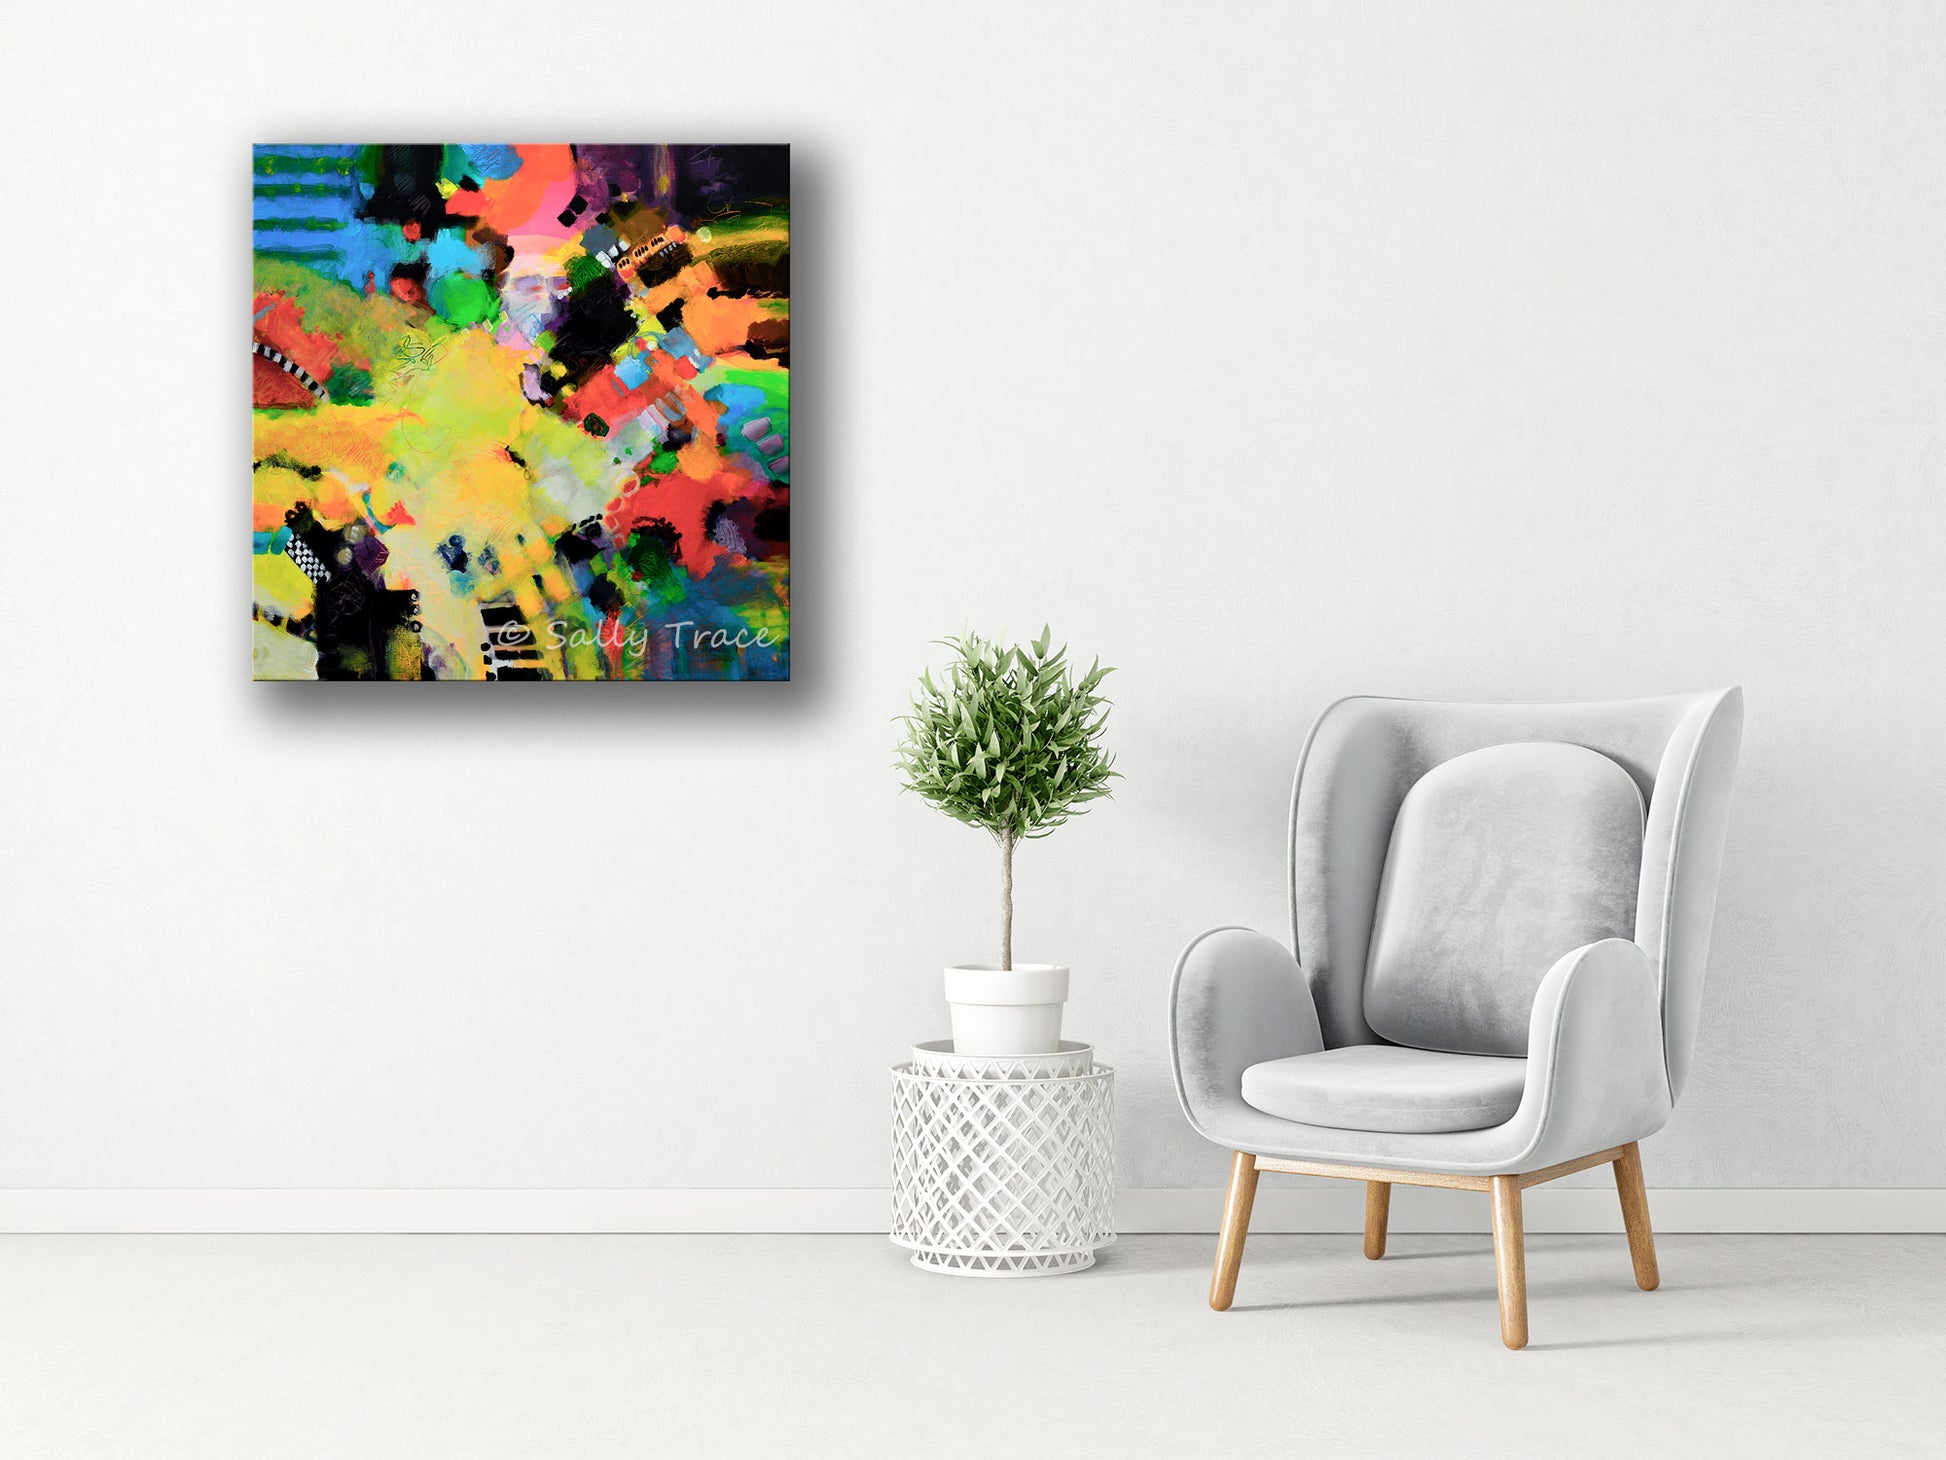 Free form color field abstract painting print by Sally Trace